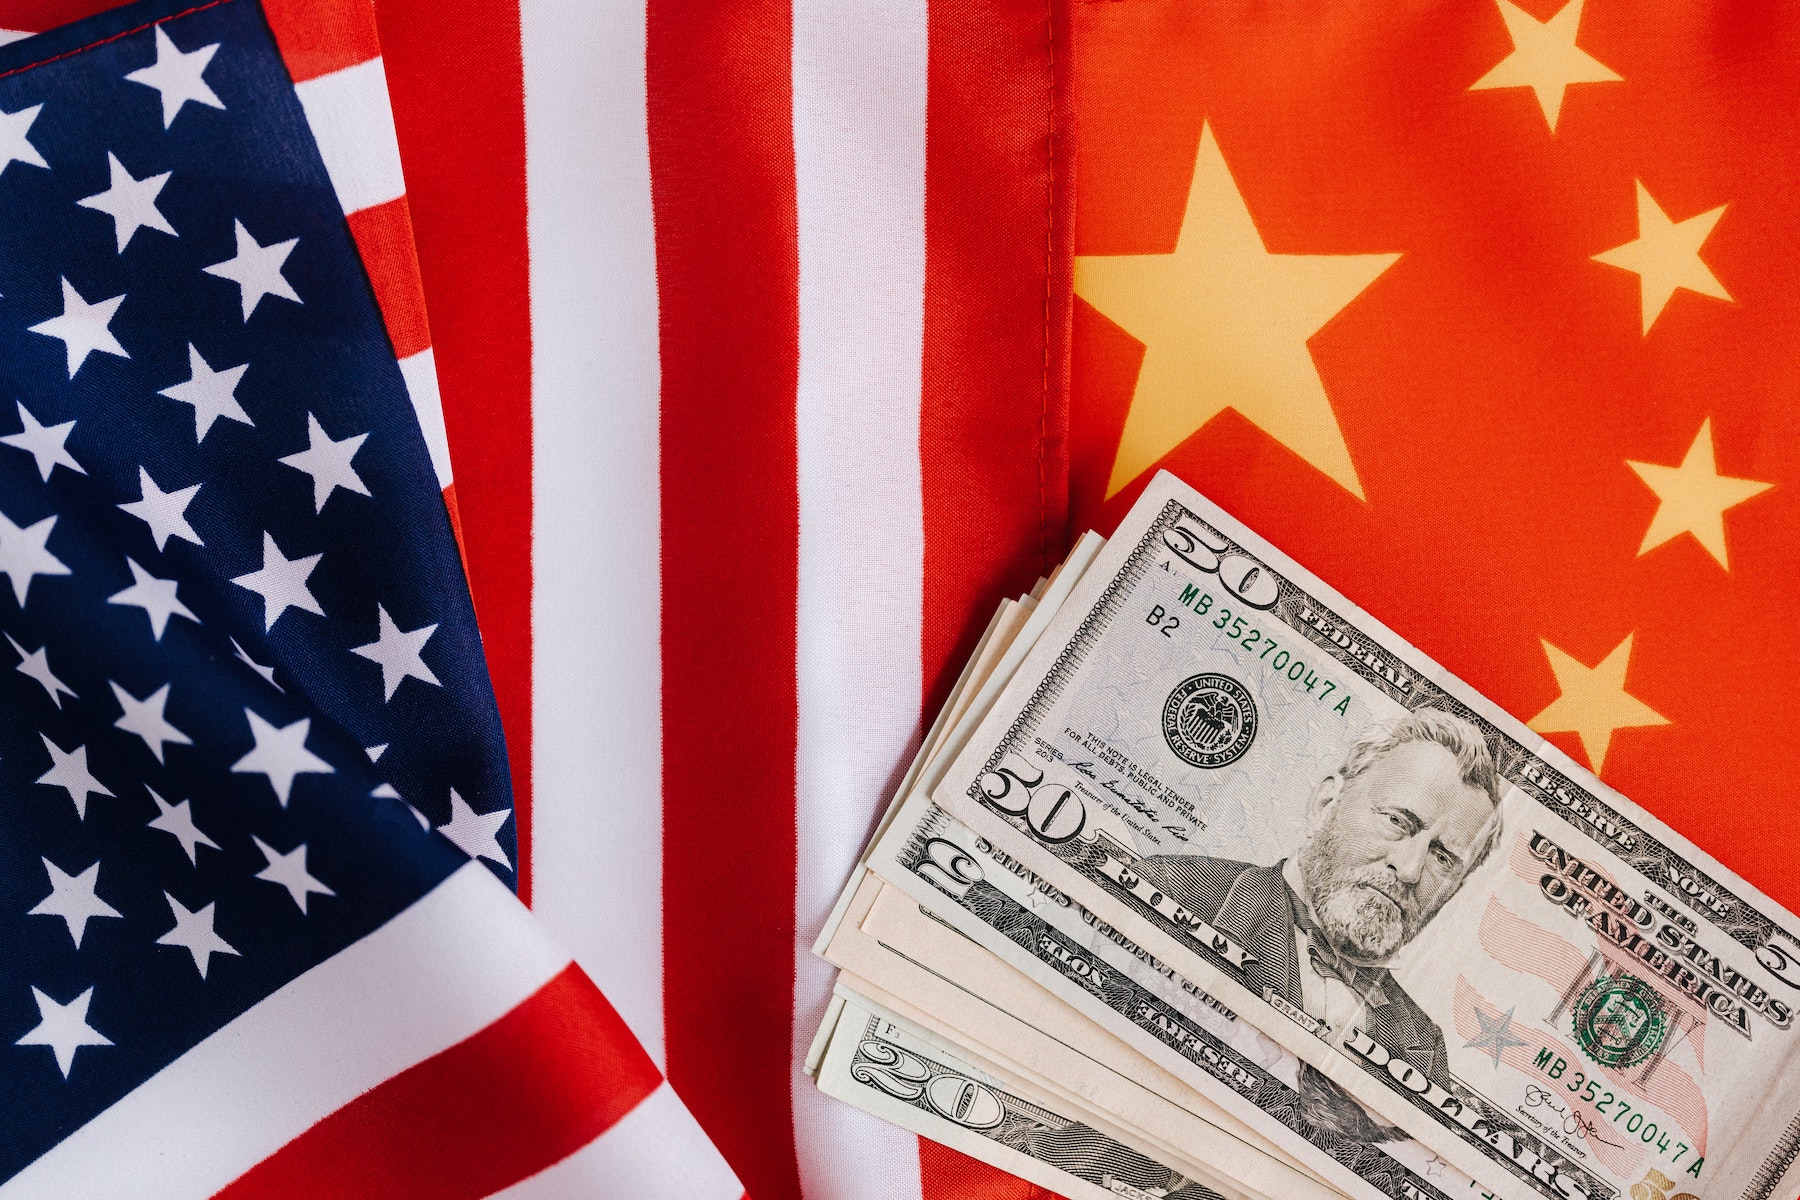 The U.S. and China have a complex and changing relationship. Pictured is an American flag, a Chinese flag, and American dollars.